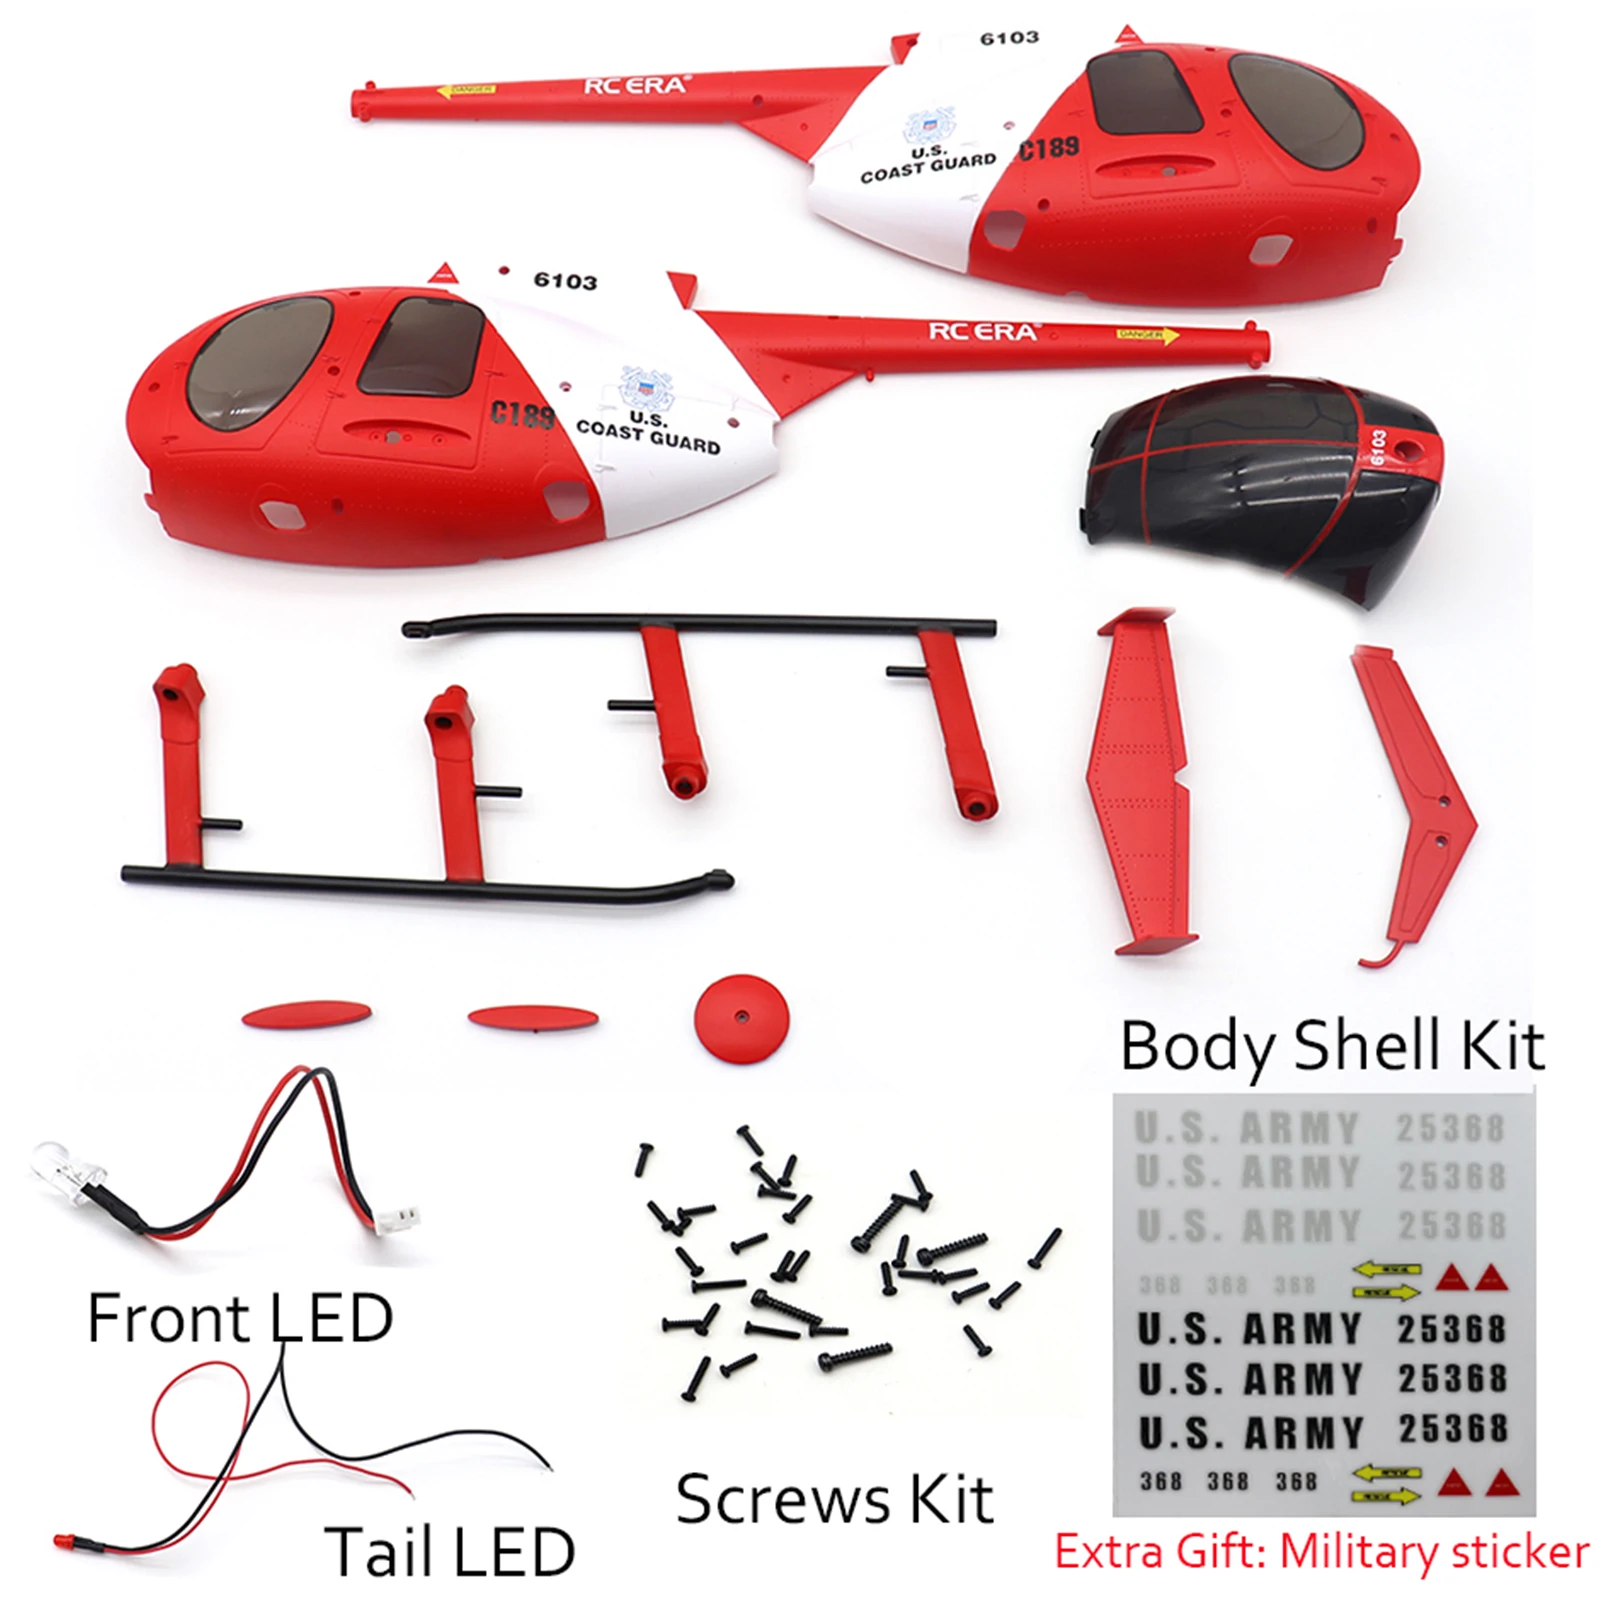 RC ERA for C189 Bird MD500 1:28 Scaled Helicopter Body Kit Red - $42.77